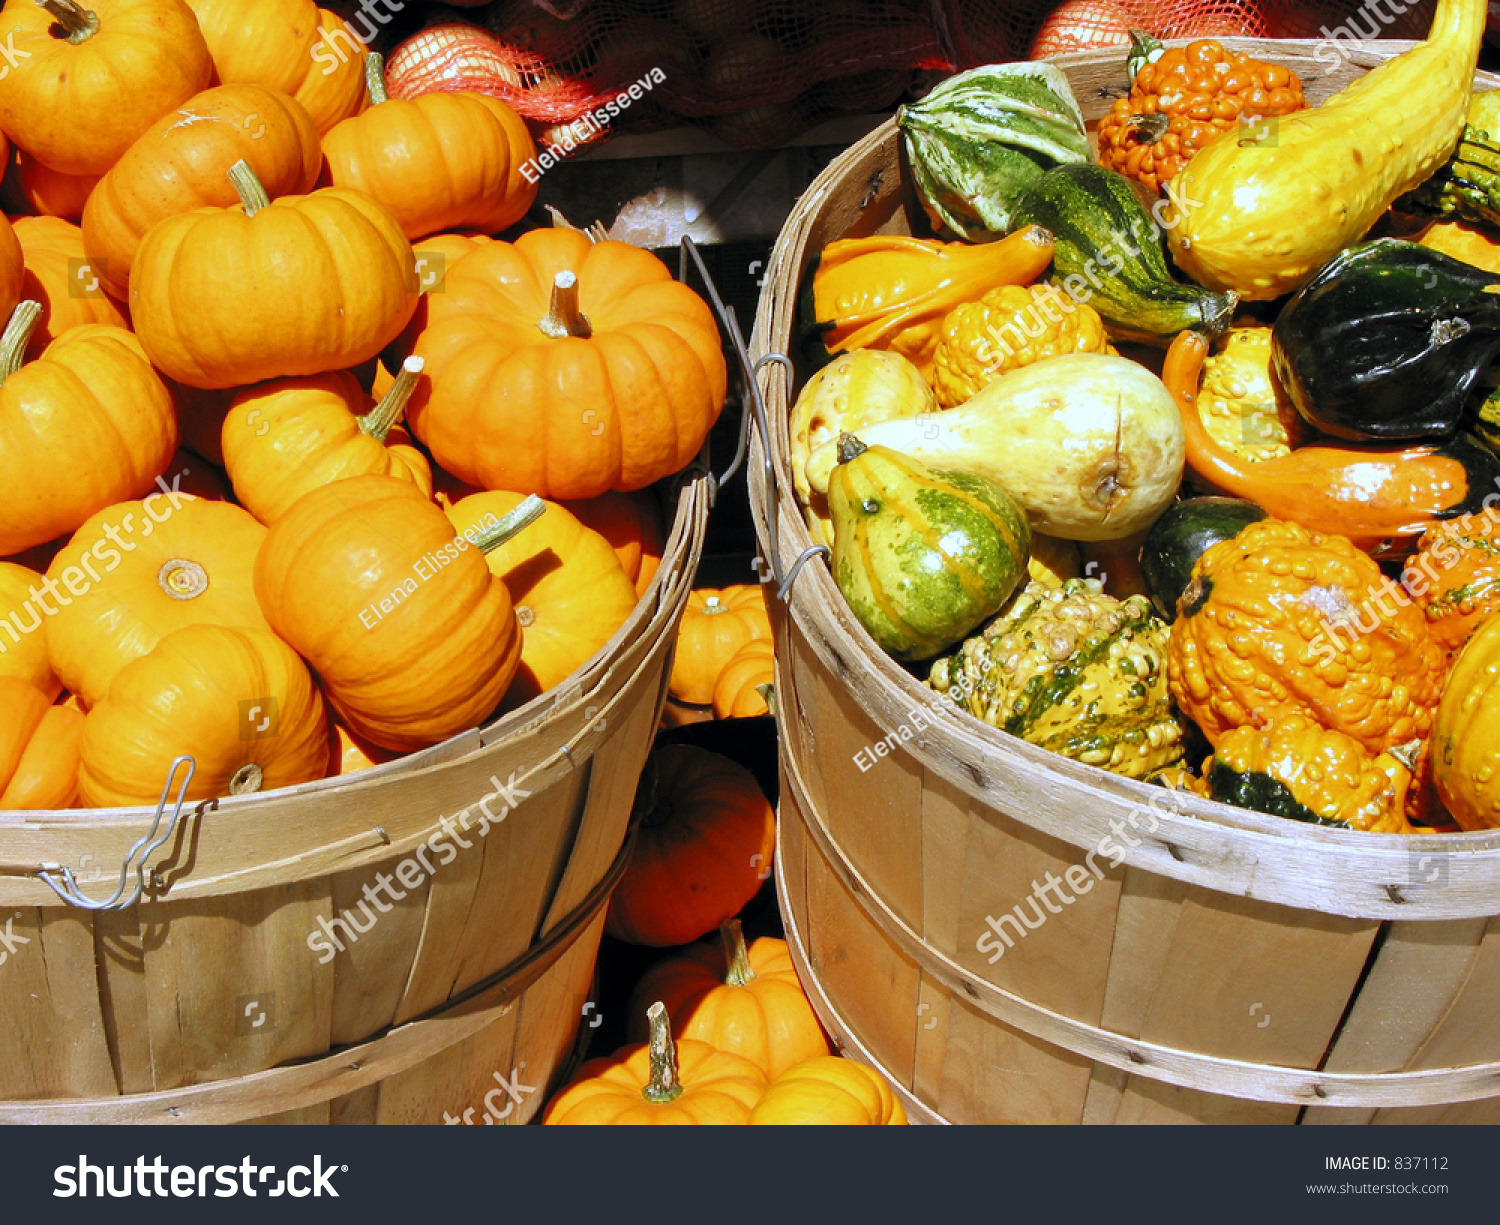 Mini Pumpkins And Gourds In Baskets On Vegetable Stand Stock Photo